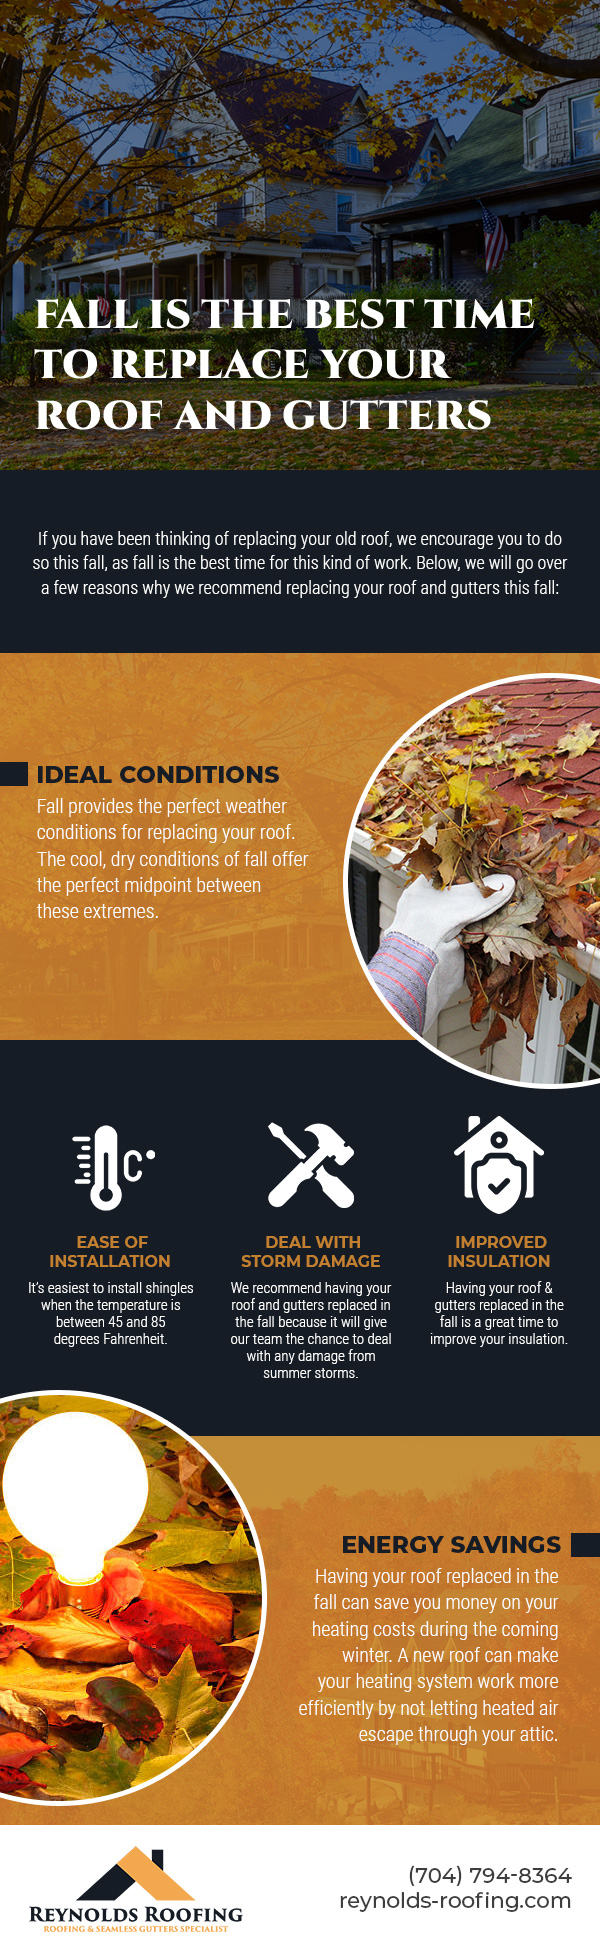 Fall is the Best Time to Replace Your Roof and Gutters